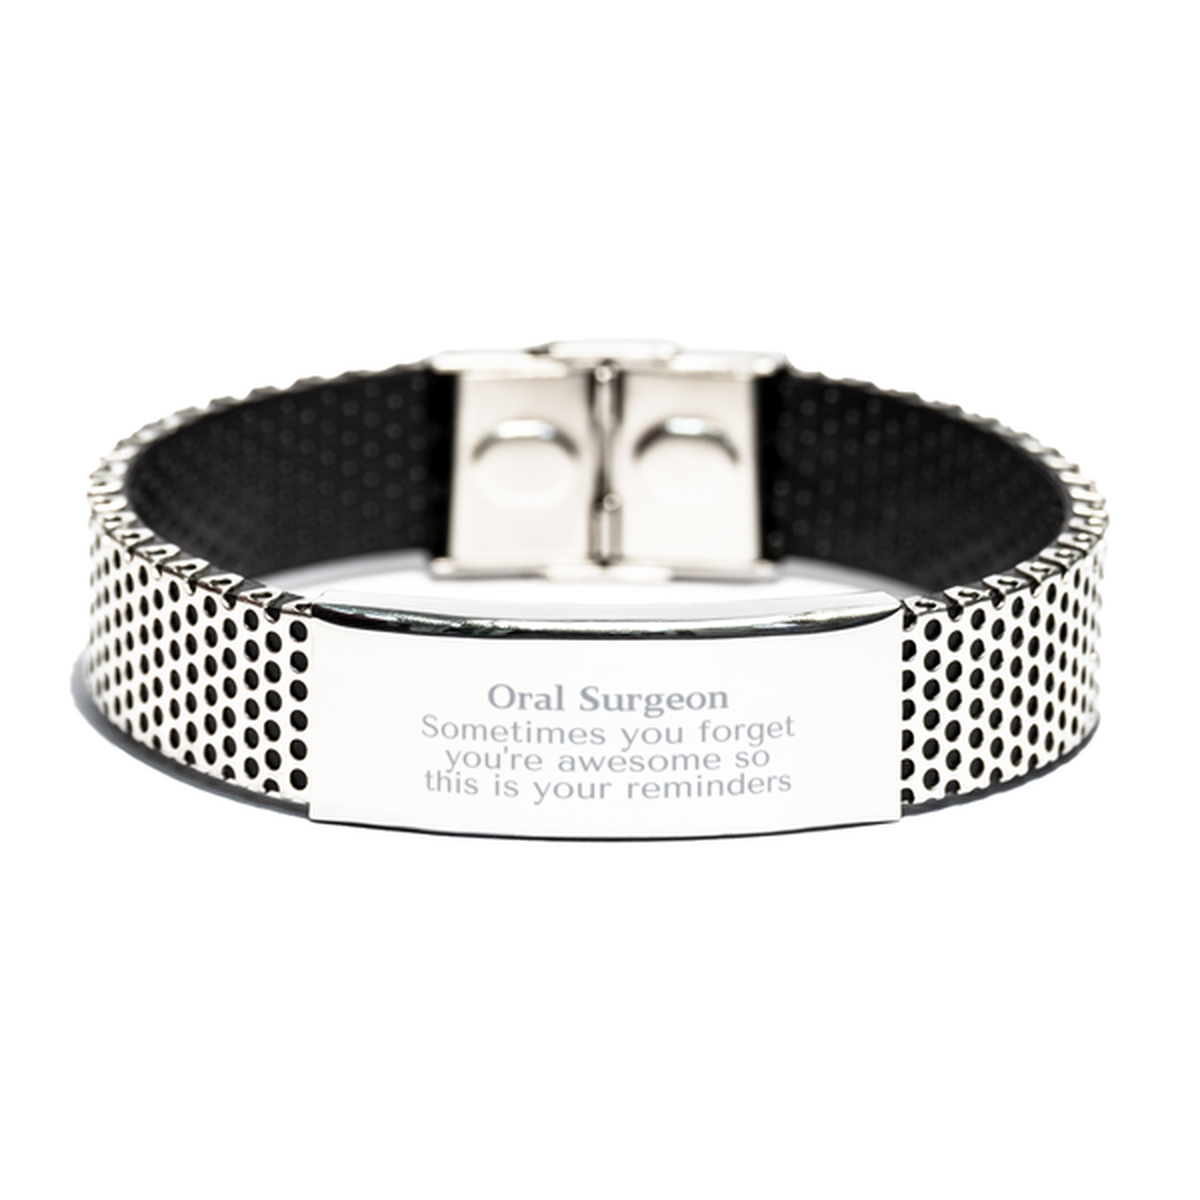 Sentimental Oral Surgeon Stainless Steel Bracelet, Oral Surgeon Sometimes you forget you're awesome so this is your reminders, Graduation Christmas Birthday Gifts for Oral Surgeon, Men, Women, Coworkers